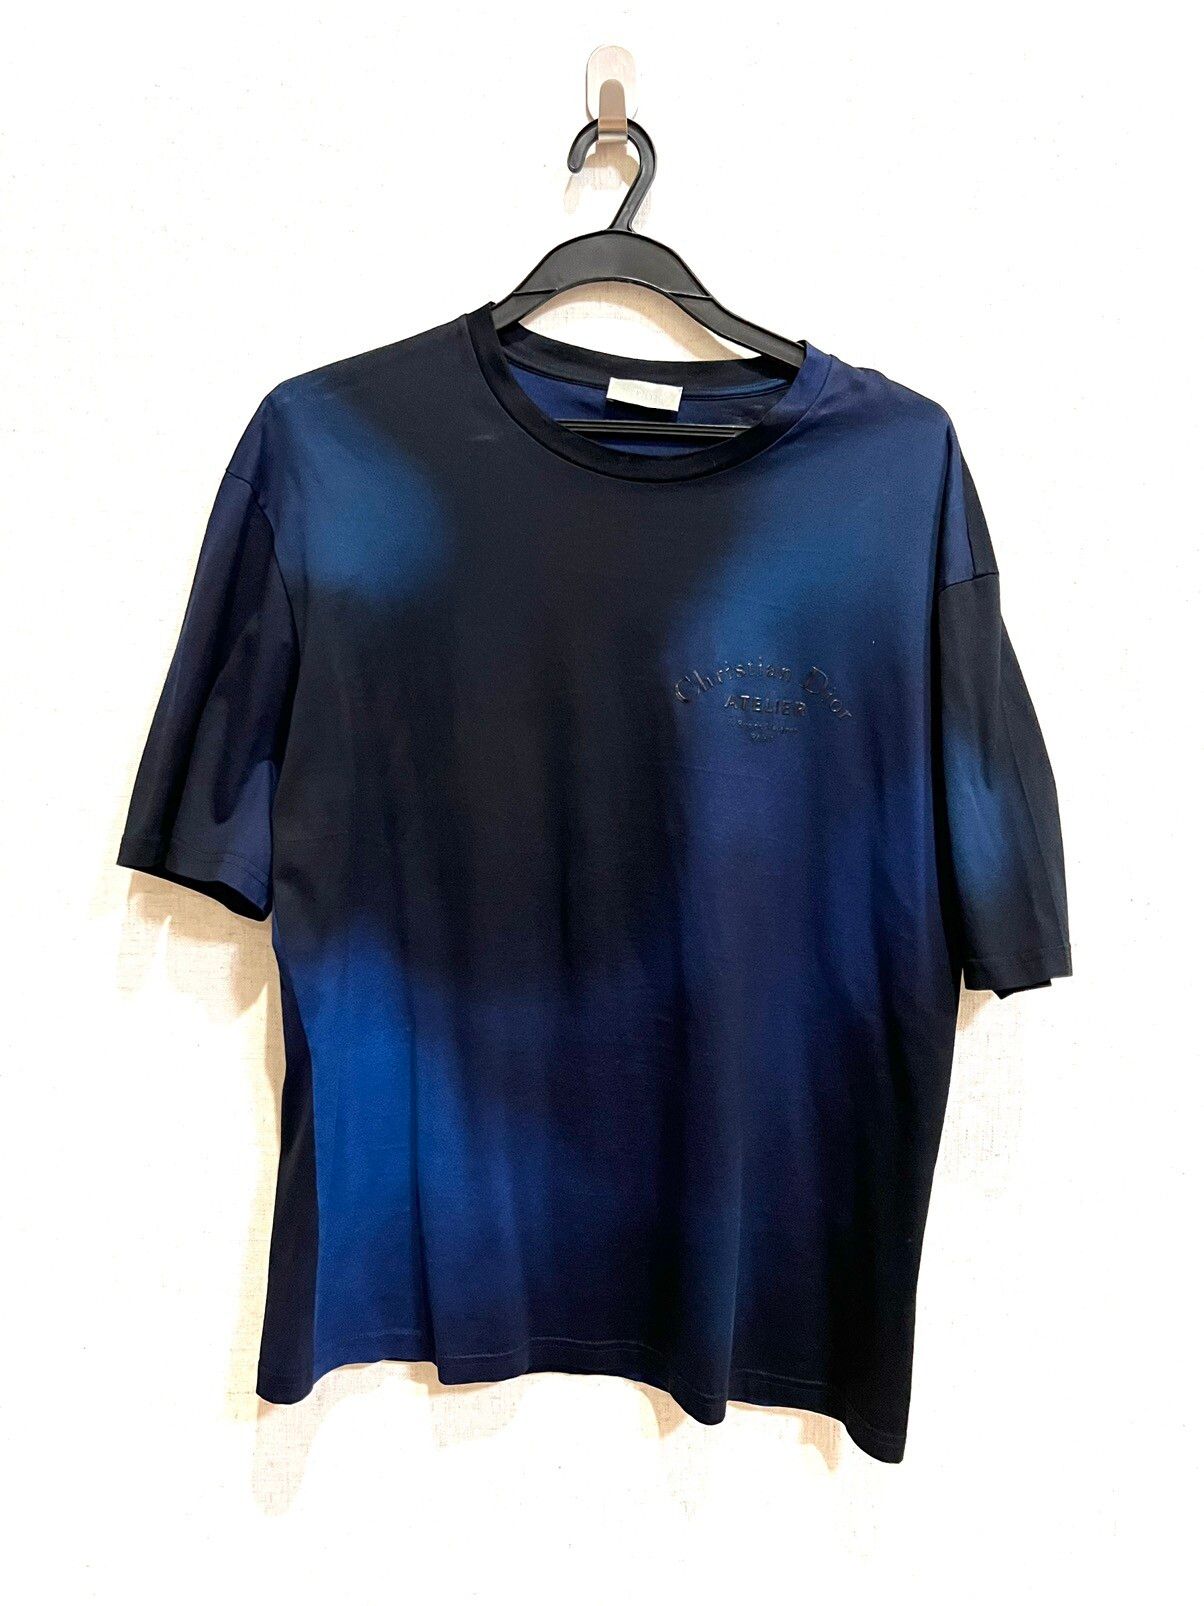 Christian Dior atelier store exclusive tee - 2